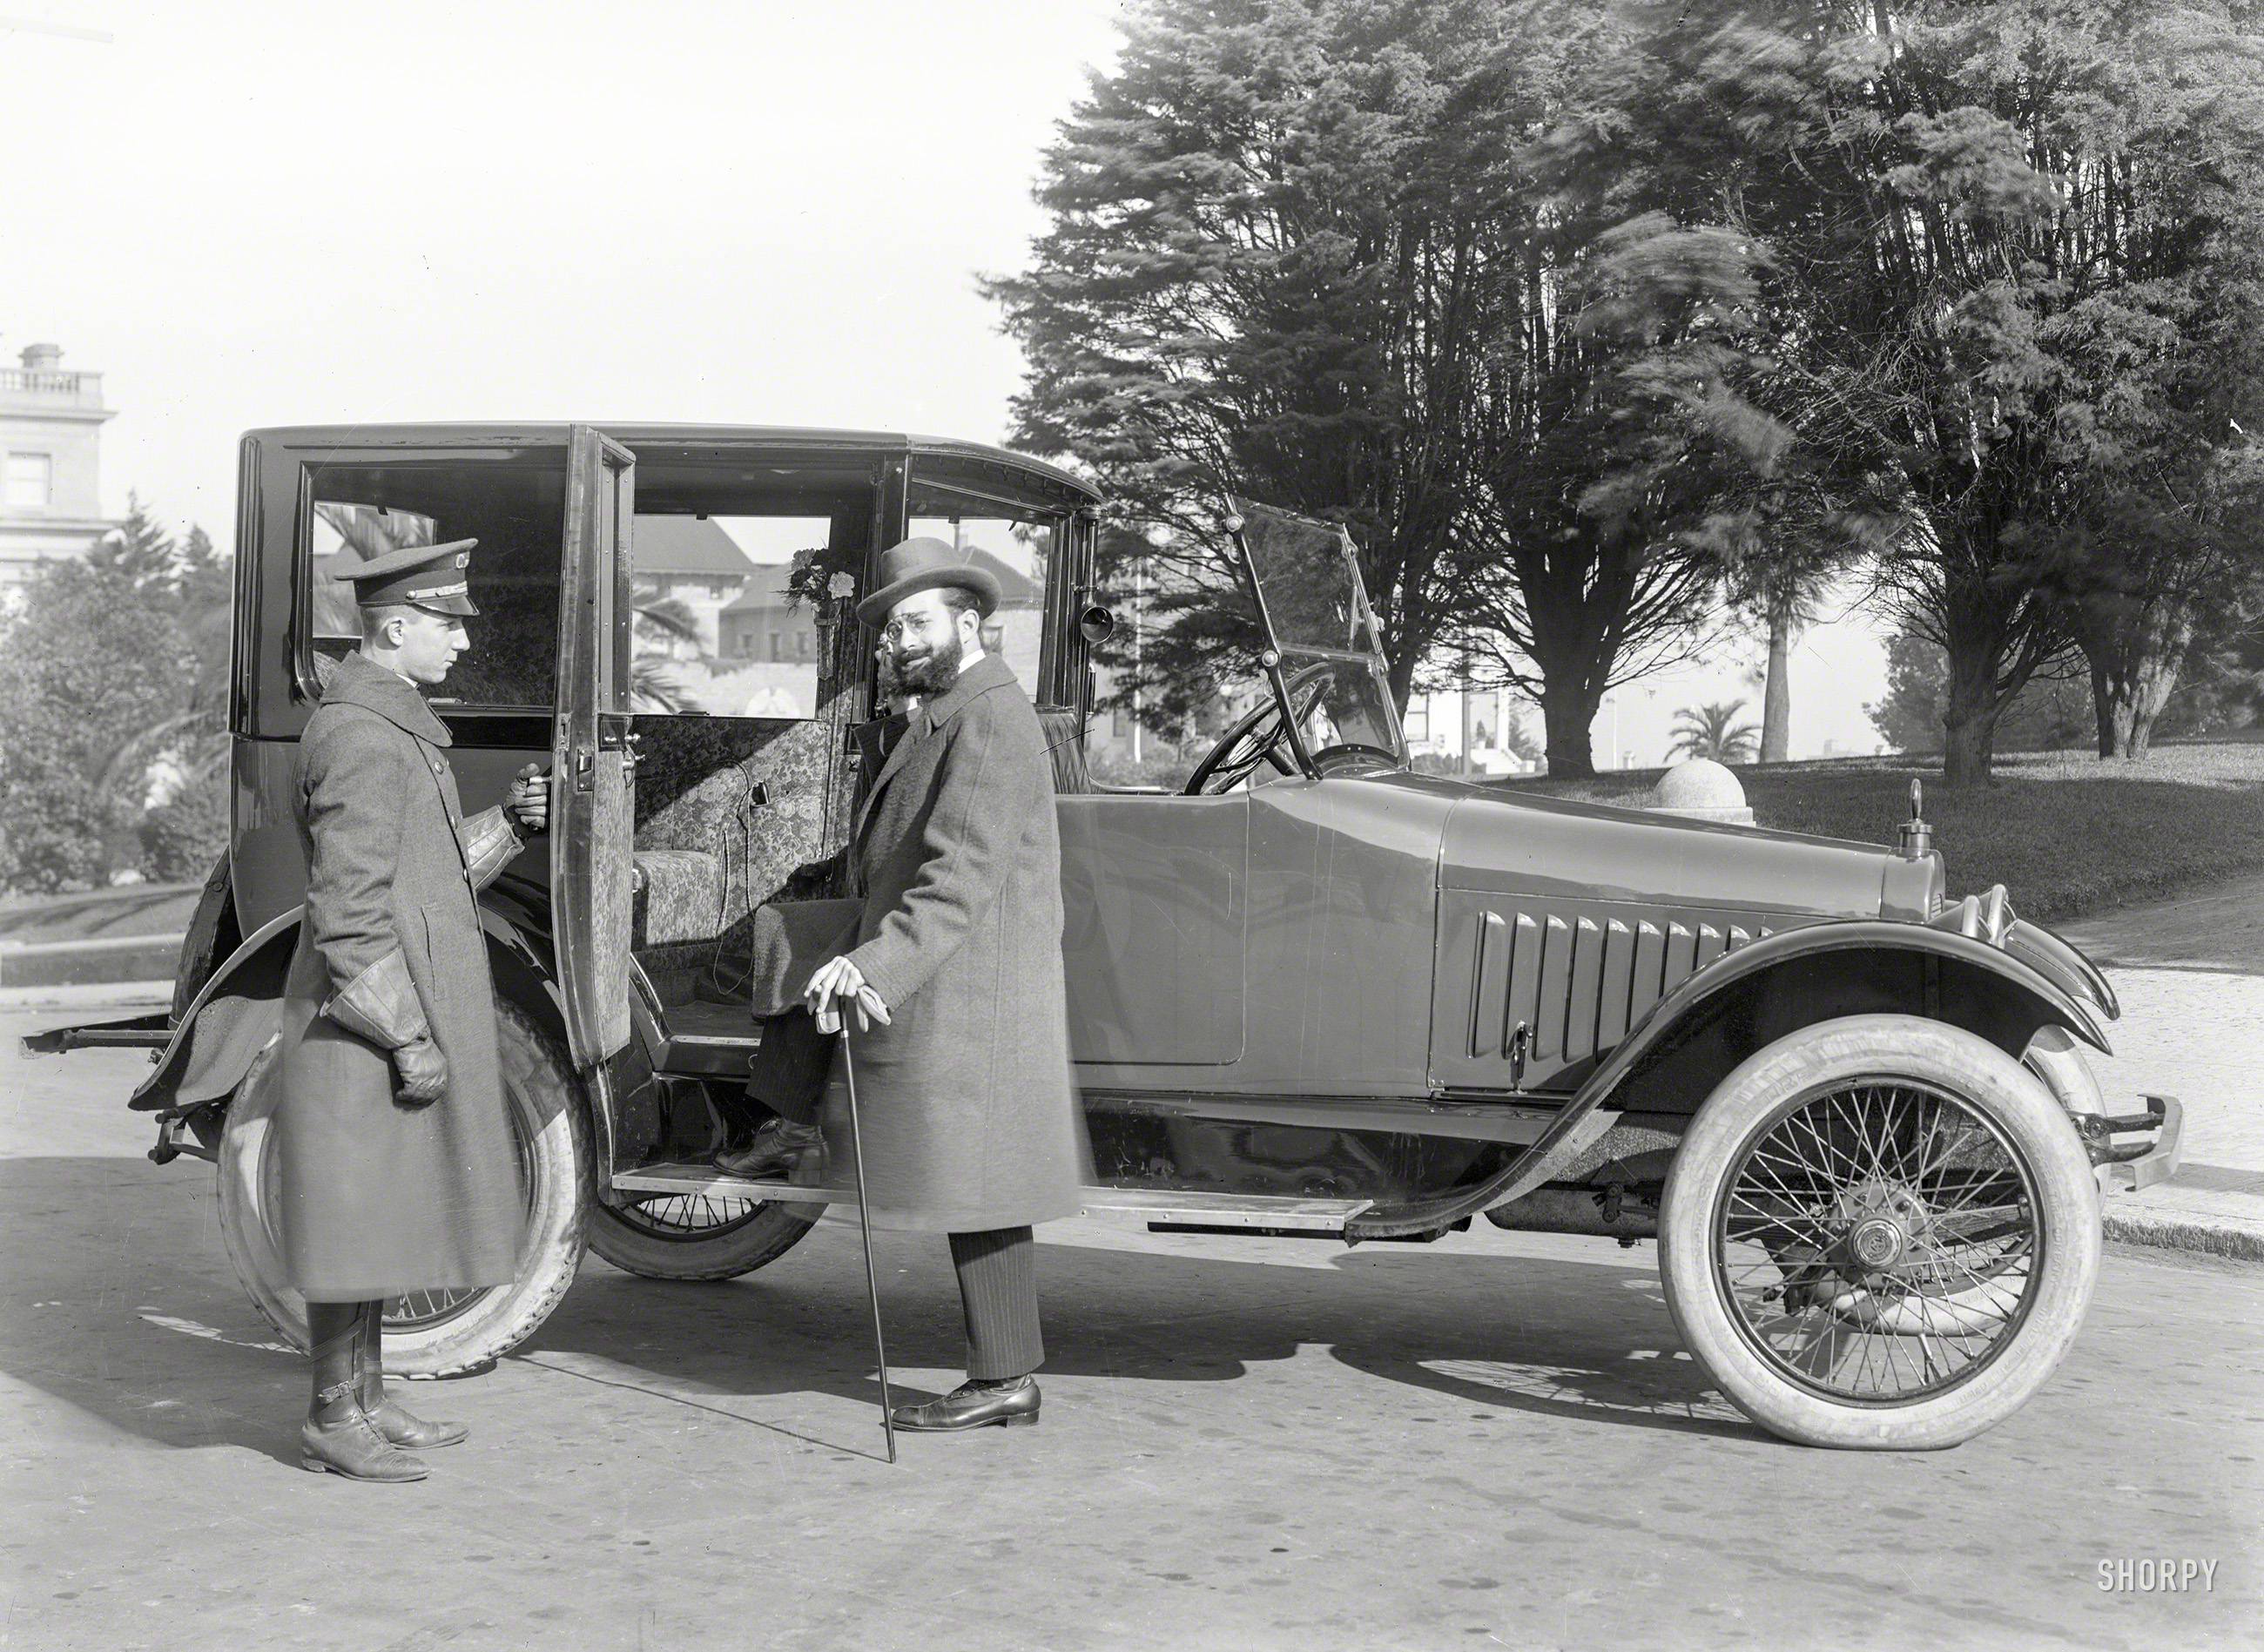 San Francisco circa 1917. "Chalmers town car." The ideal conveyance for European nobility, effete academics and the like. Und James, ve do hope zat zeze flowers in de vaz are fresh. 5x7 glass negative by Christopher Helin. View full size.